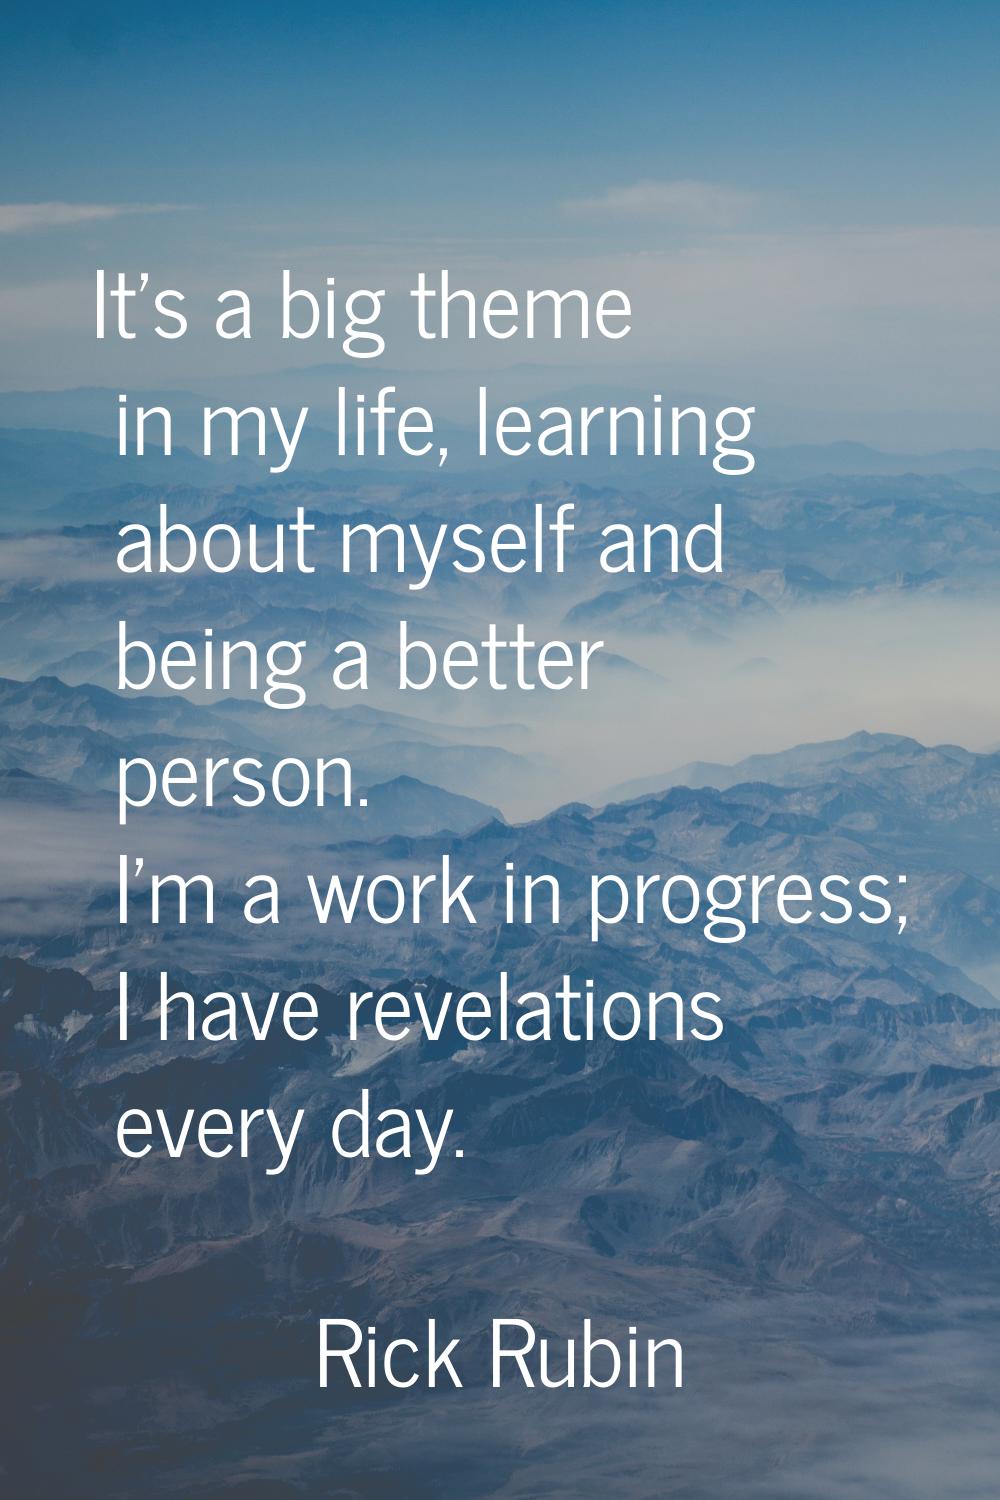 It's a big theme in my life, learning about myself and being a better person. I'm a work in progres